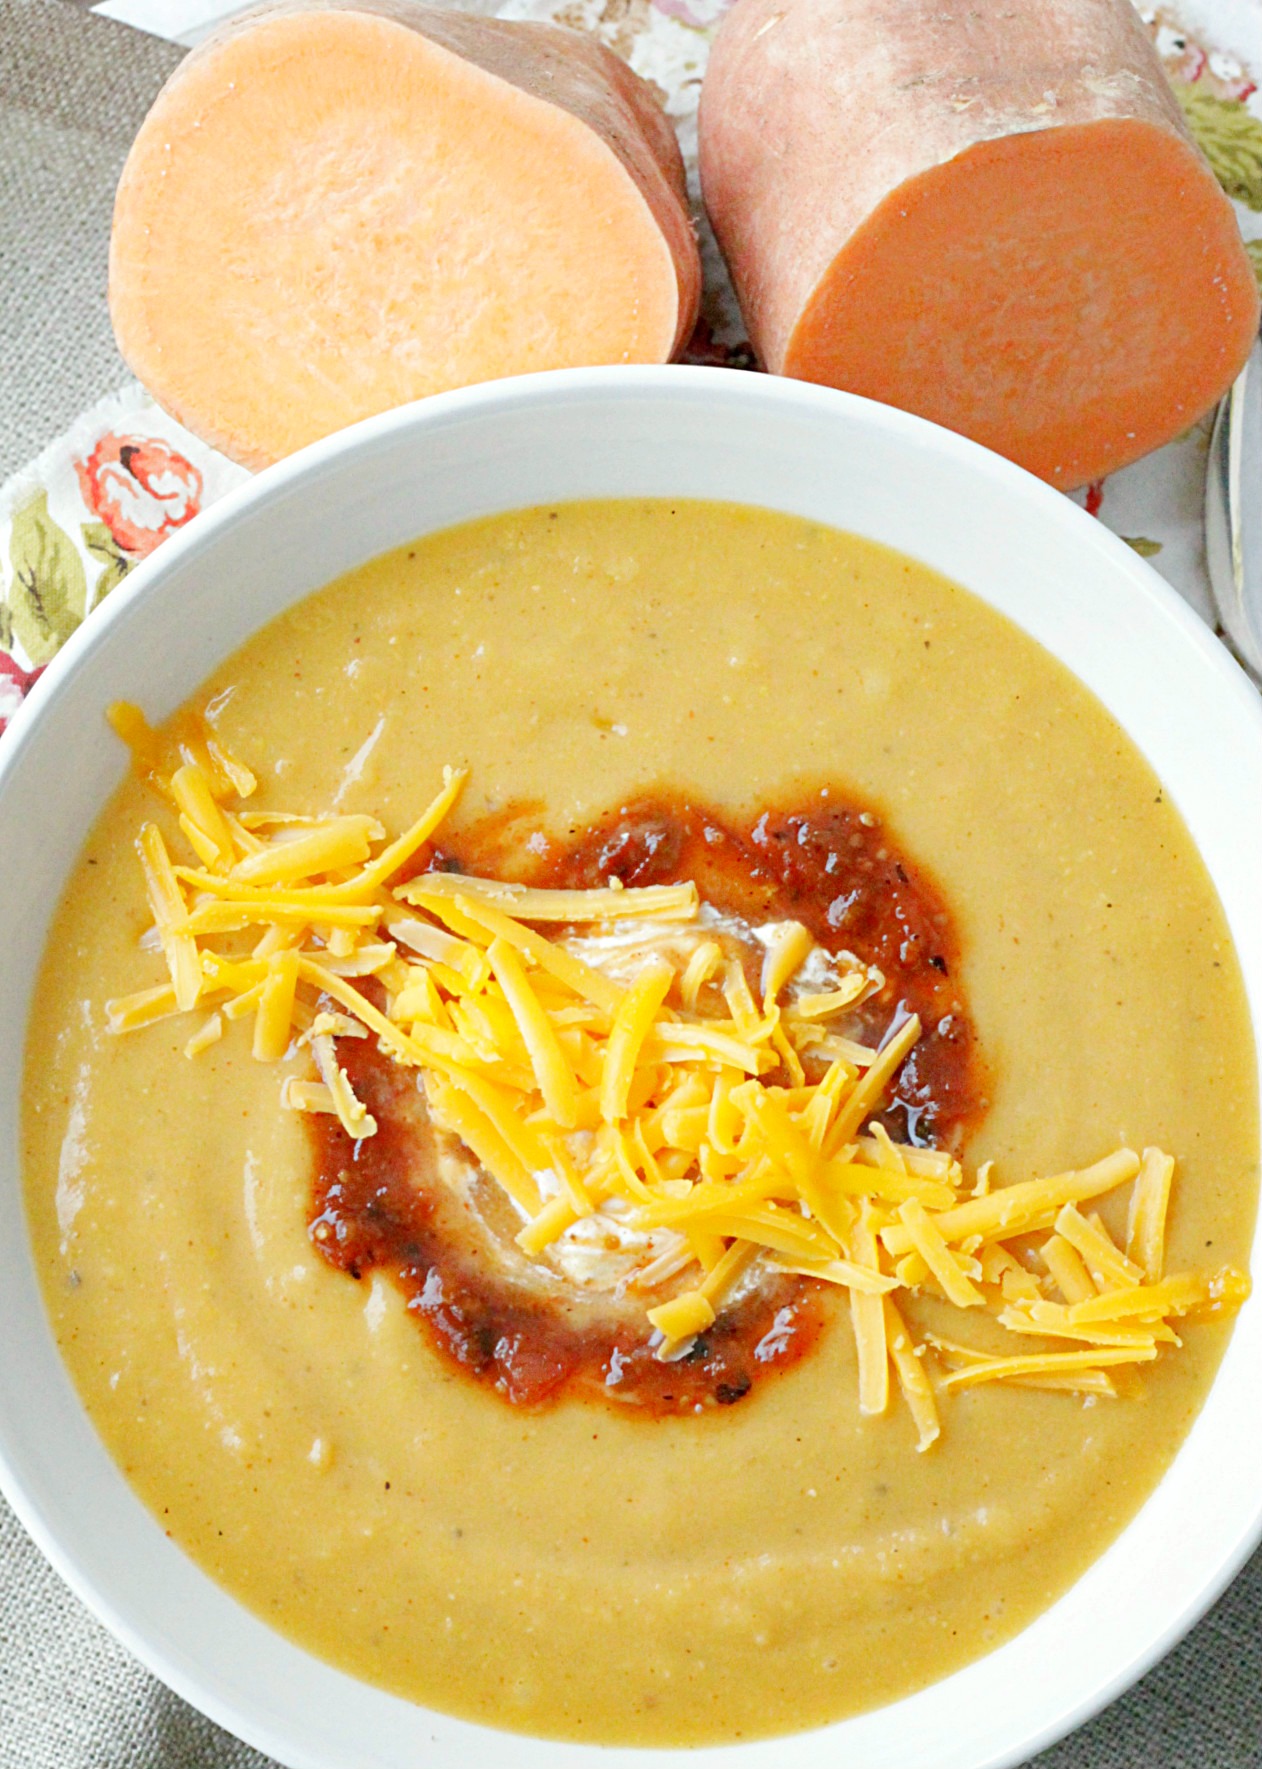 southwester sweet potato soup in bowl overhead view